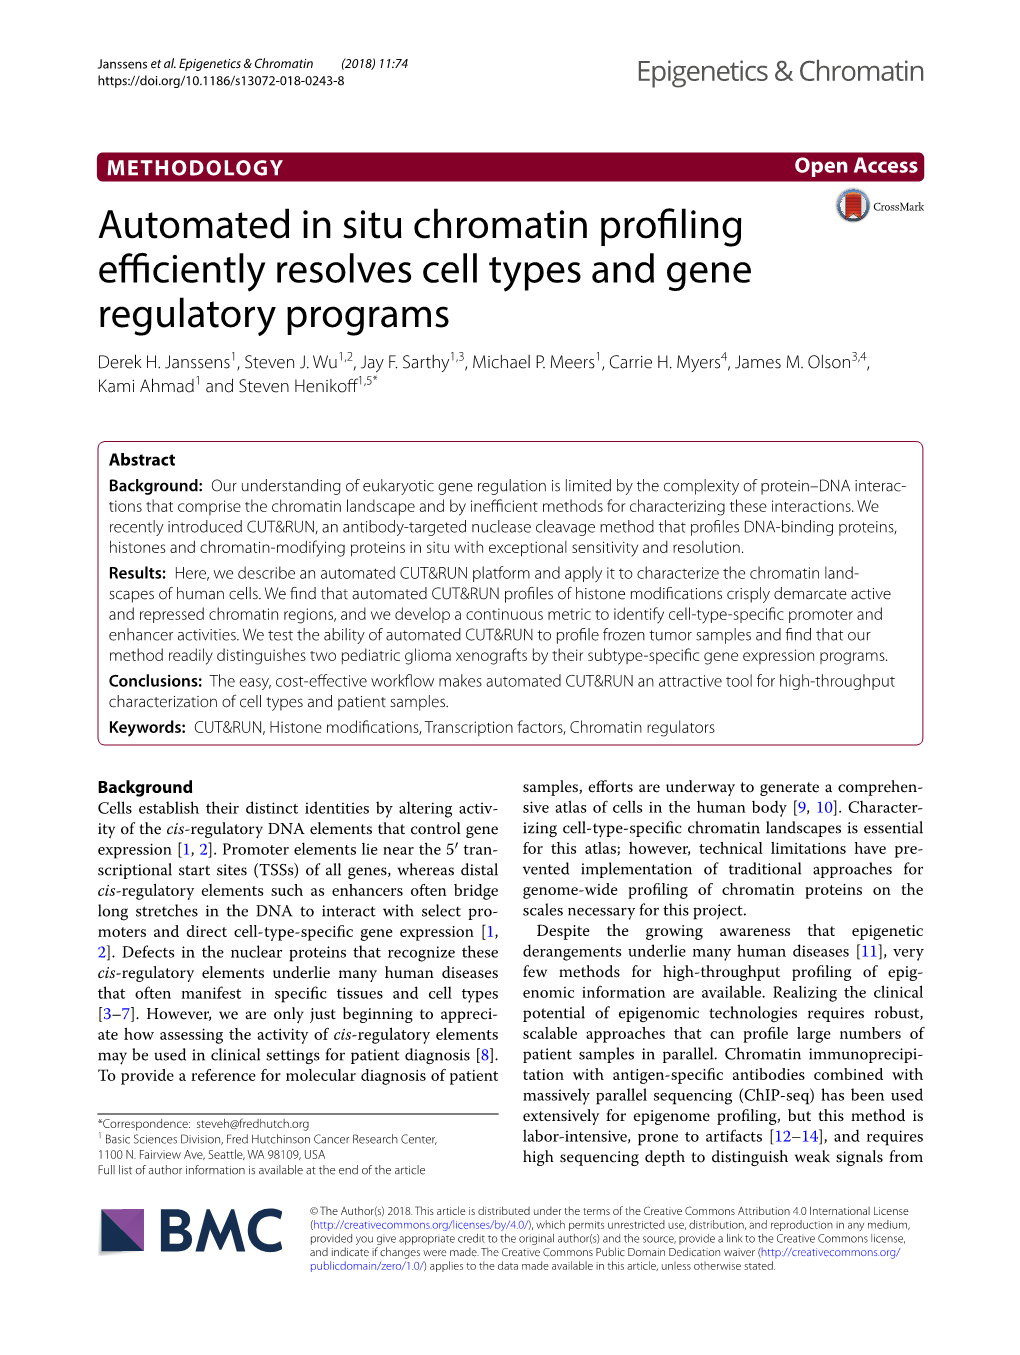 Automated in Situ Chromatin Profiling Efficiently Resolves Cell Types and Gene Regulatory Programs